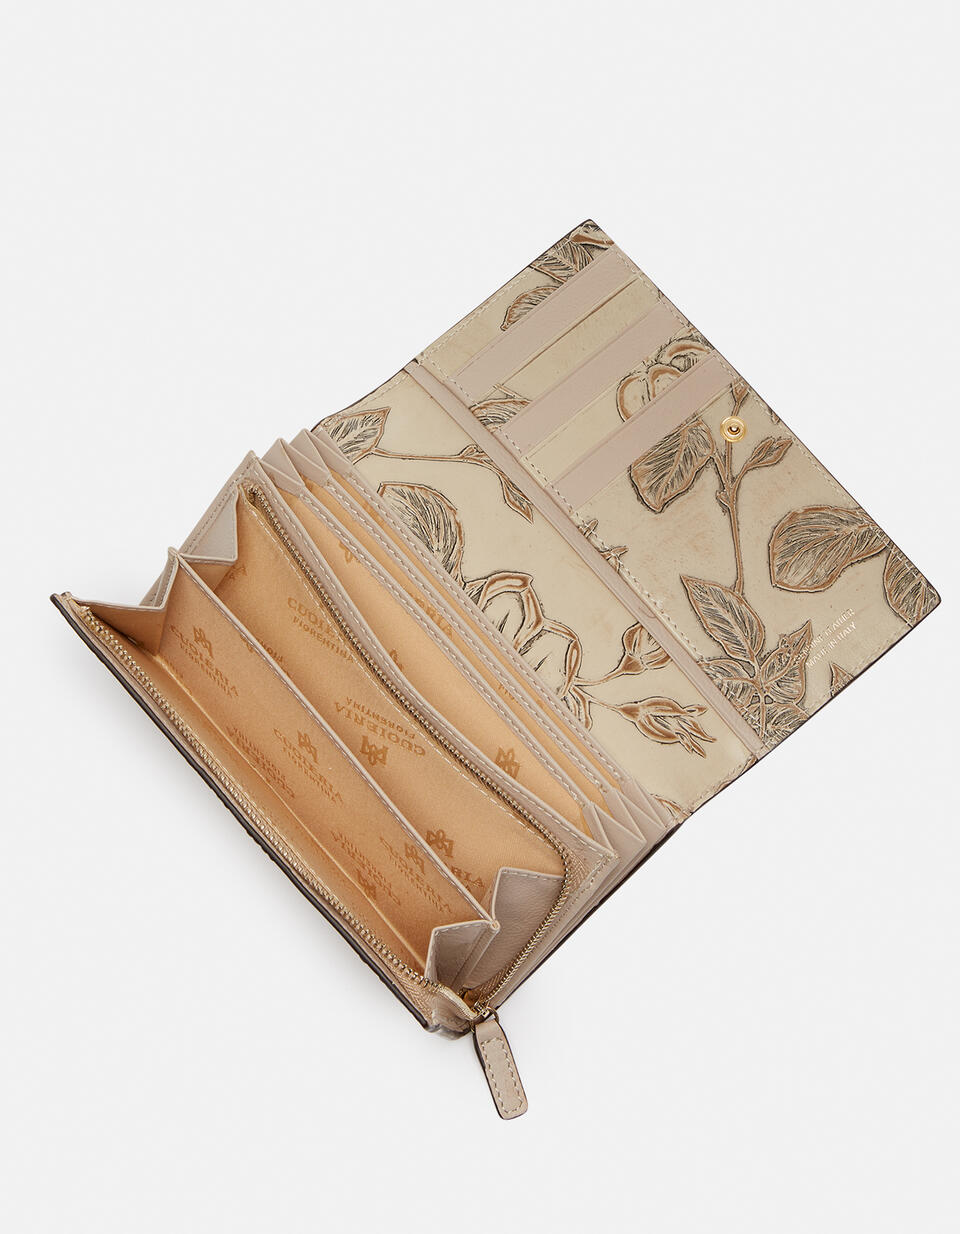 Accordian style wallet TAUPE  - Women's Wallets - Women's Wallets - Wallets - Cuoieria Fiorentina